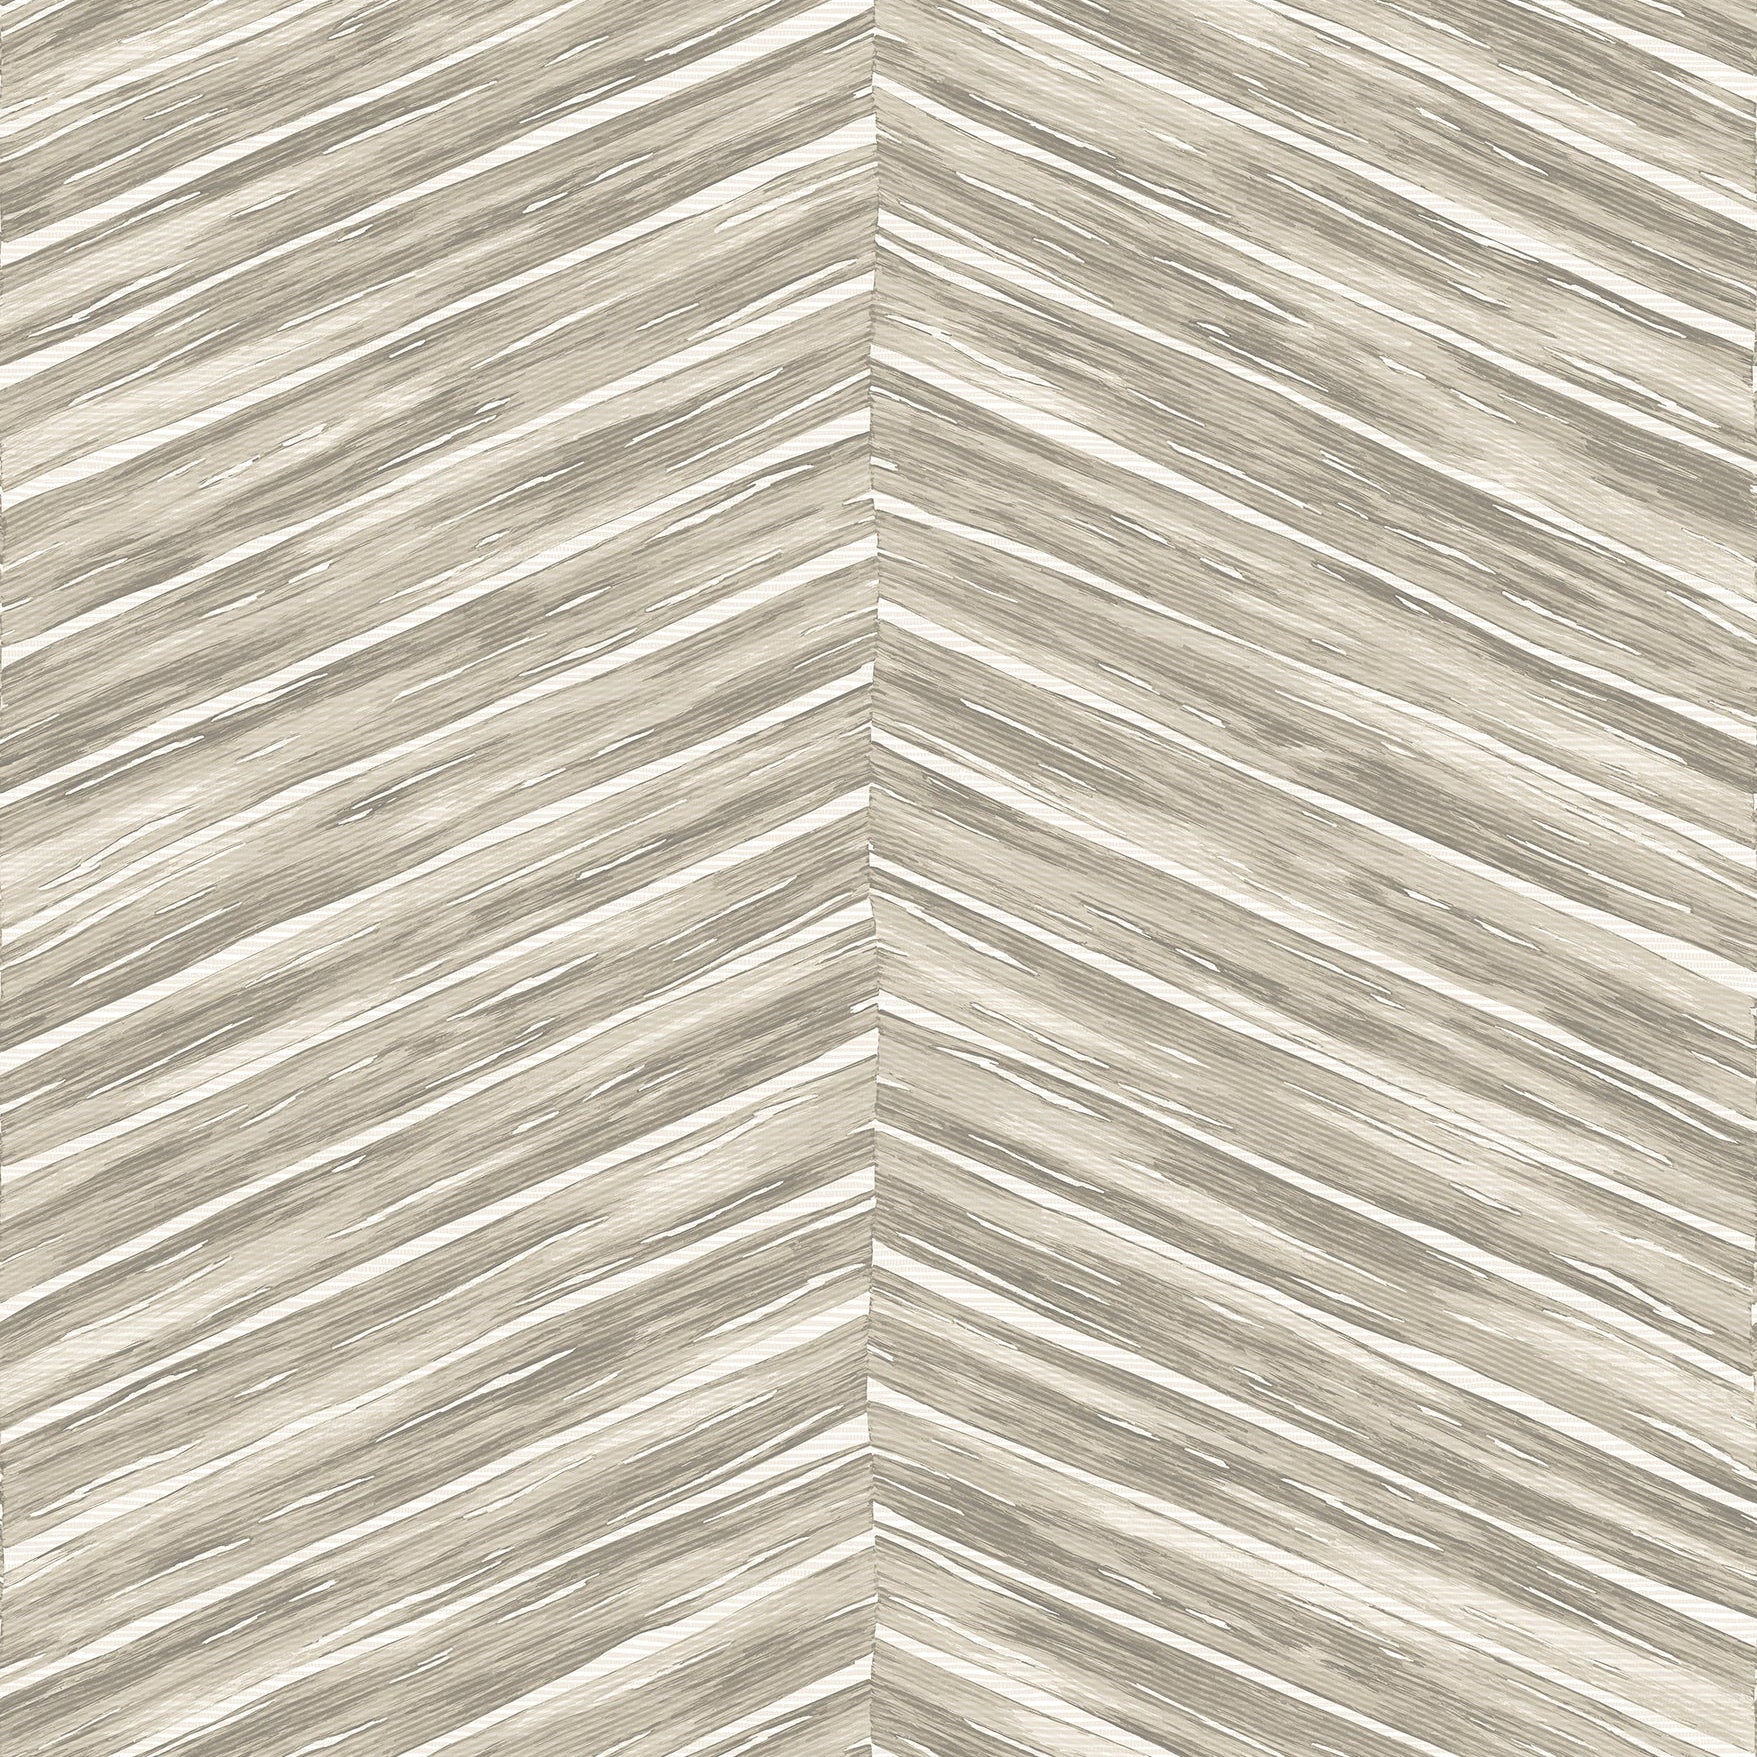 Shop 2767-23775 Pina Neutral Chevron Weave Techniques & Finishes III Brewster